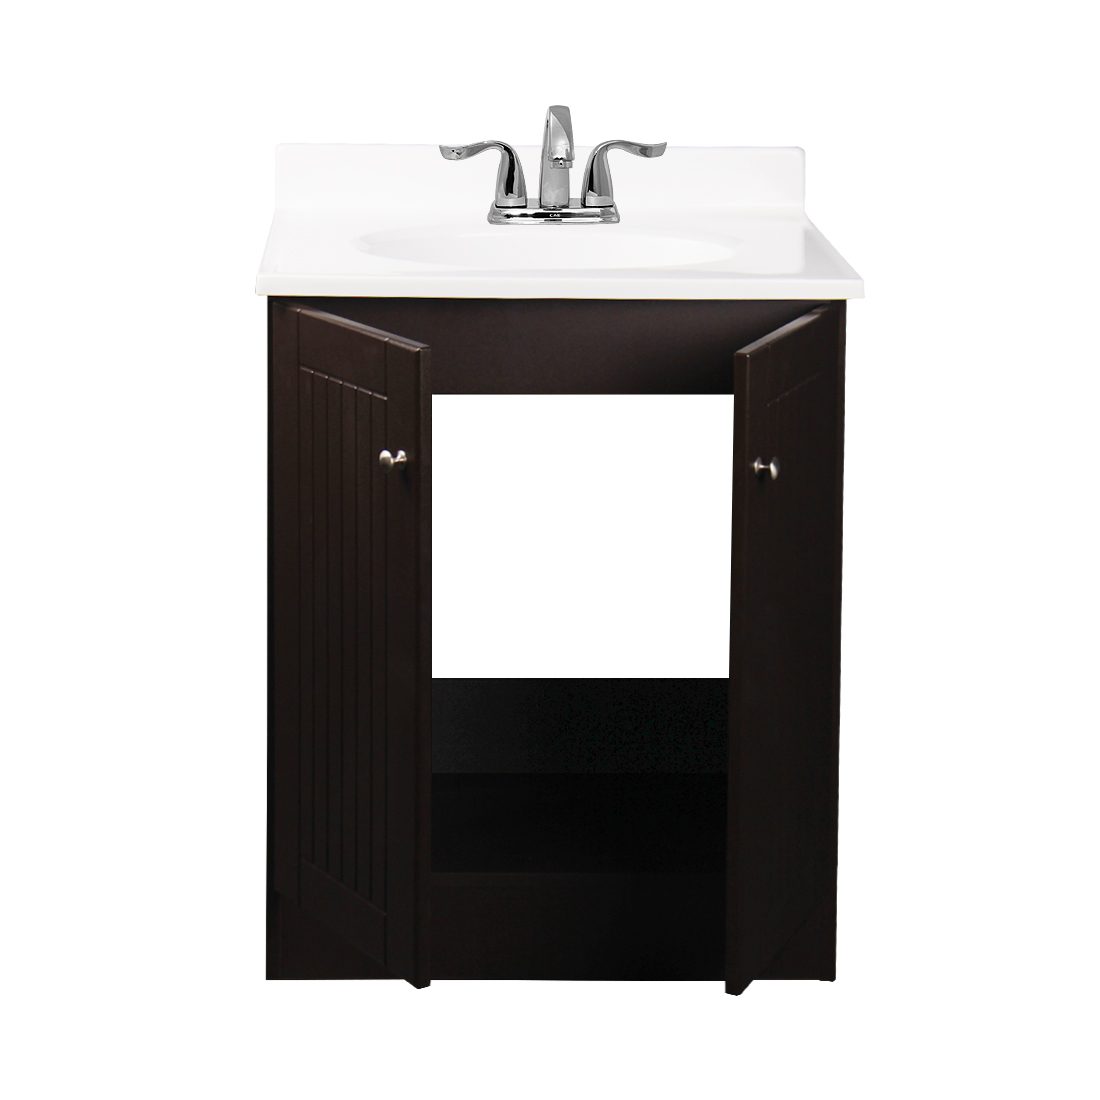 Tivoli 25inch Vanity With Poly Marble Basin Chocolate Inside View